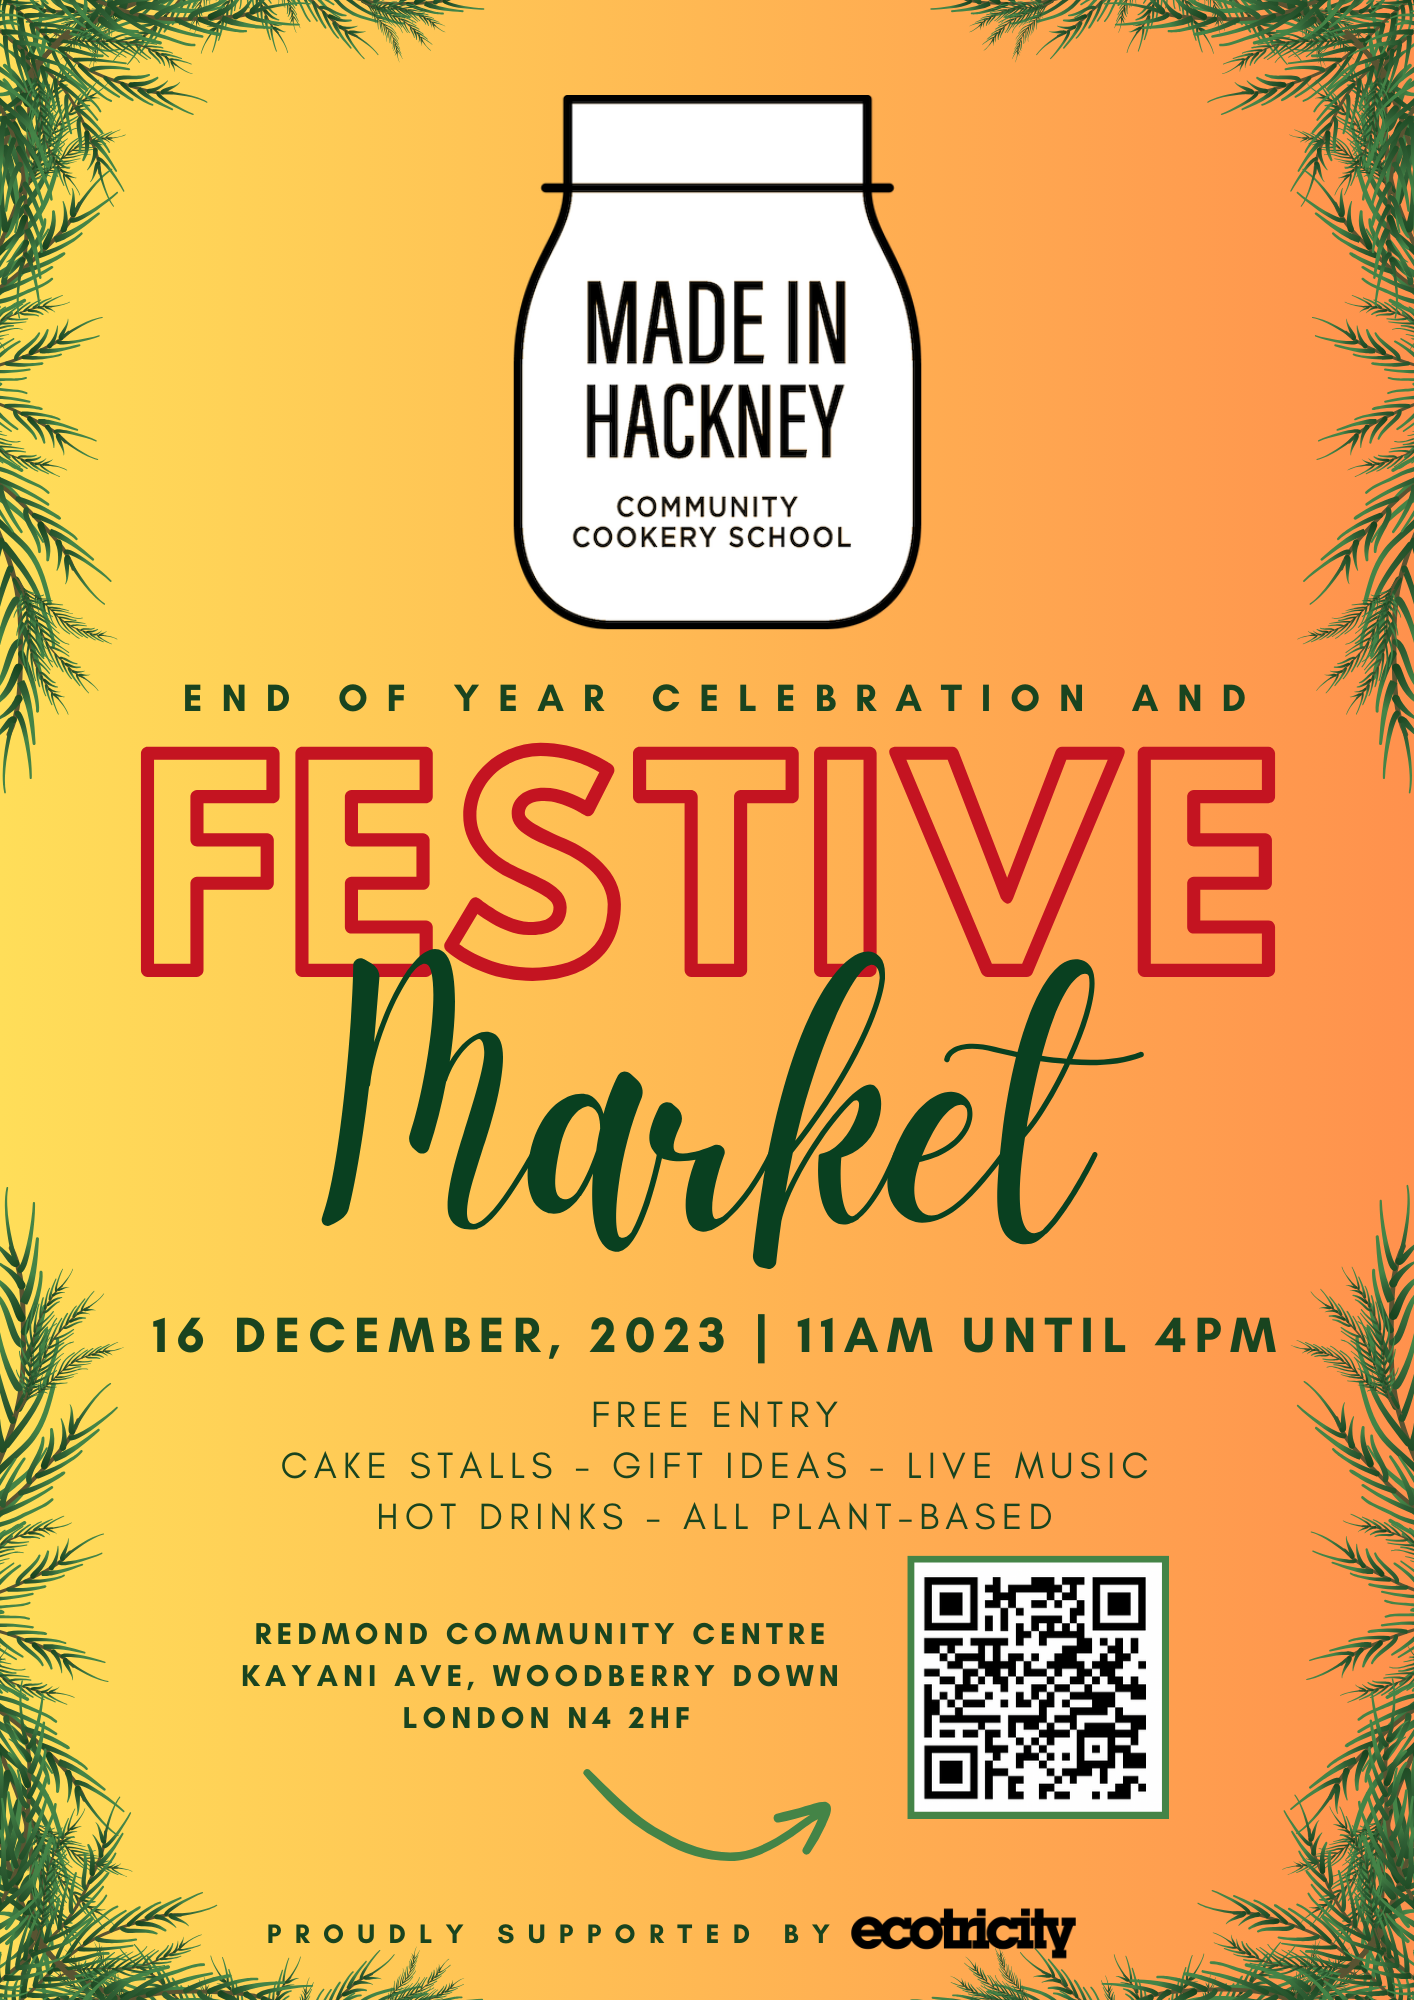 Event - End of Year Celebration and Festive Market